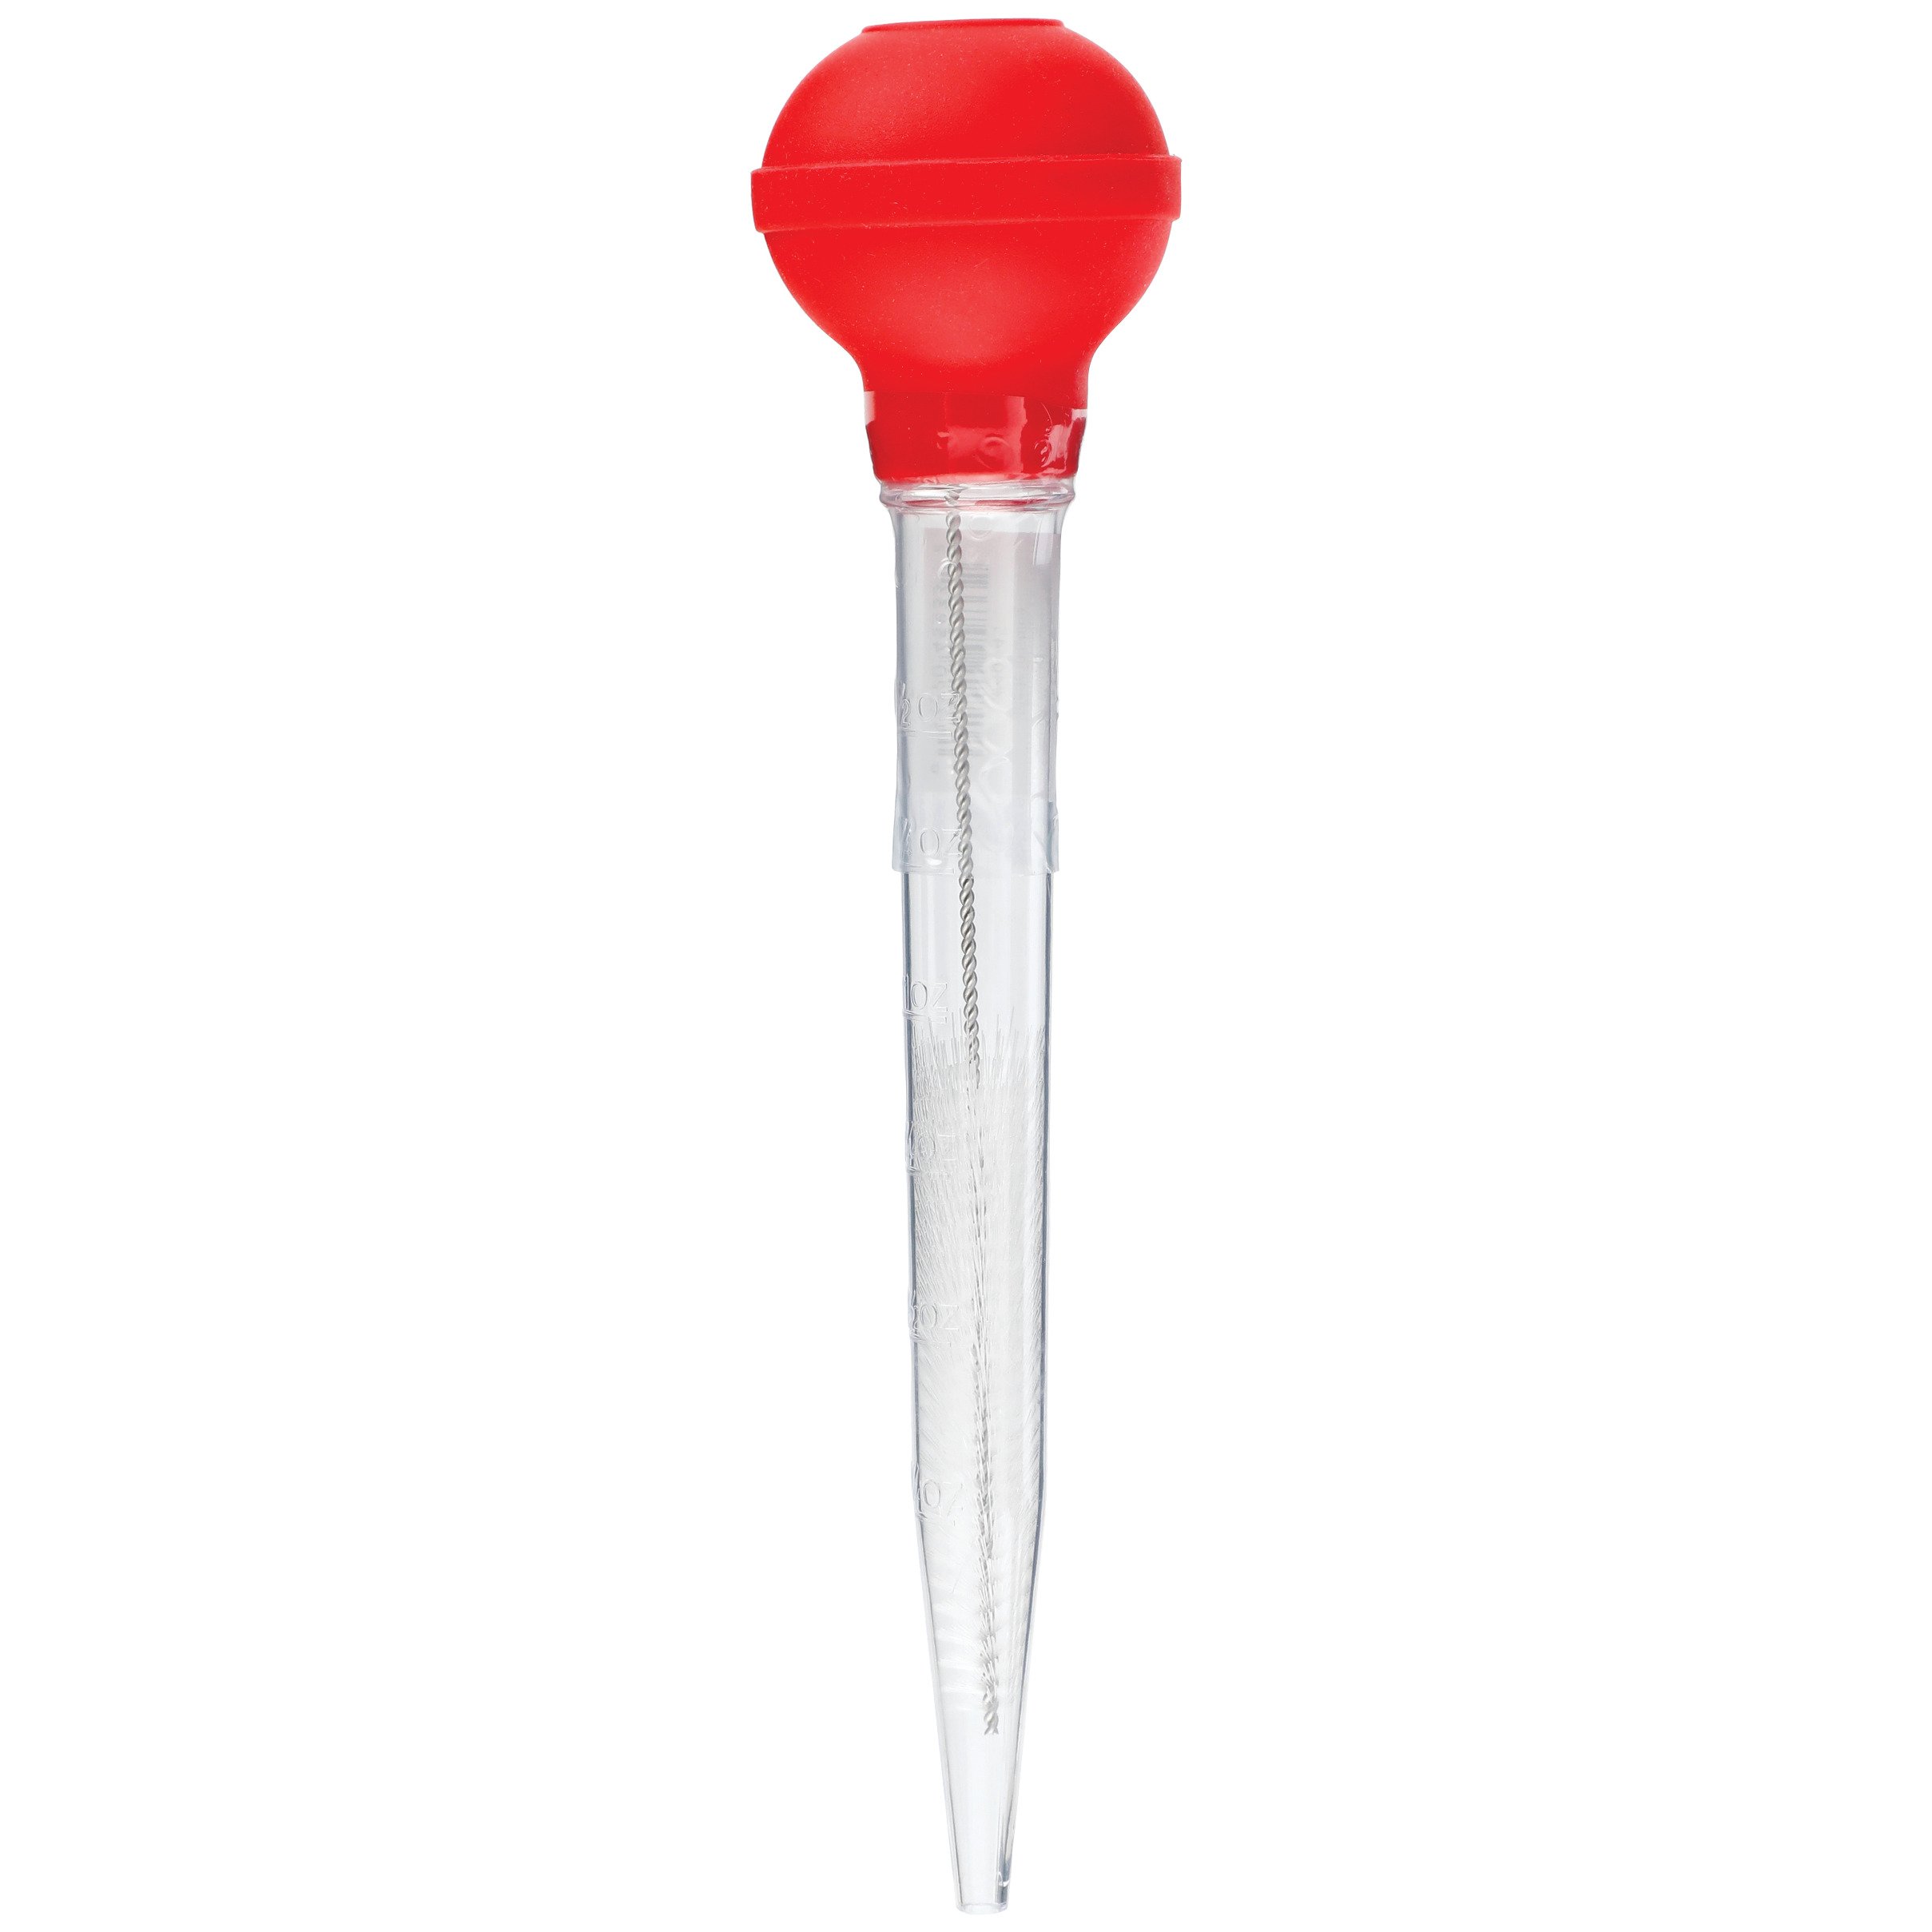 chefstyle Silicone Basting Brush - Shop Baking Tools at H-E-B